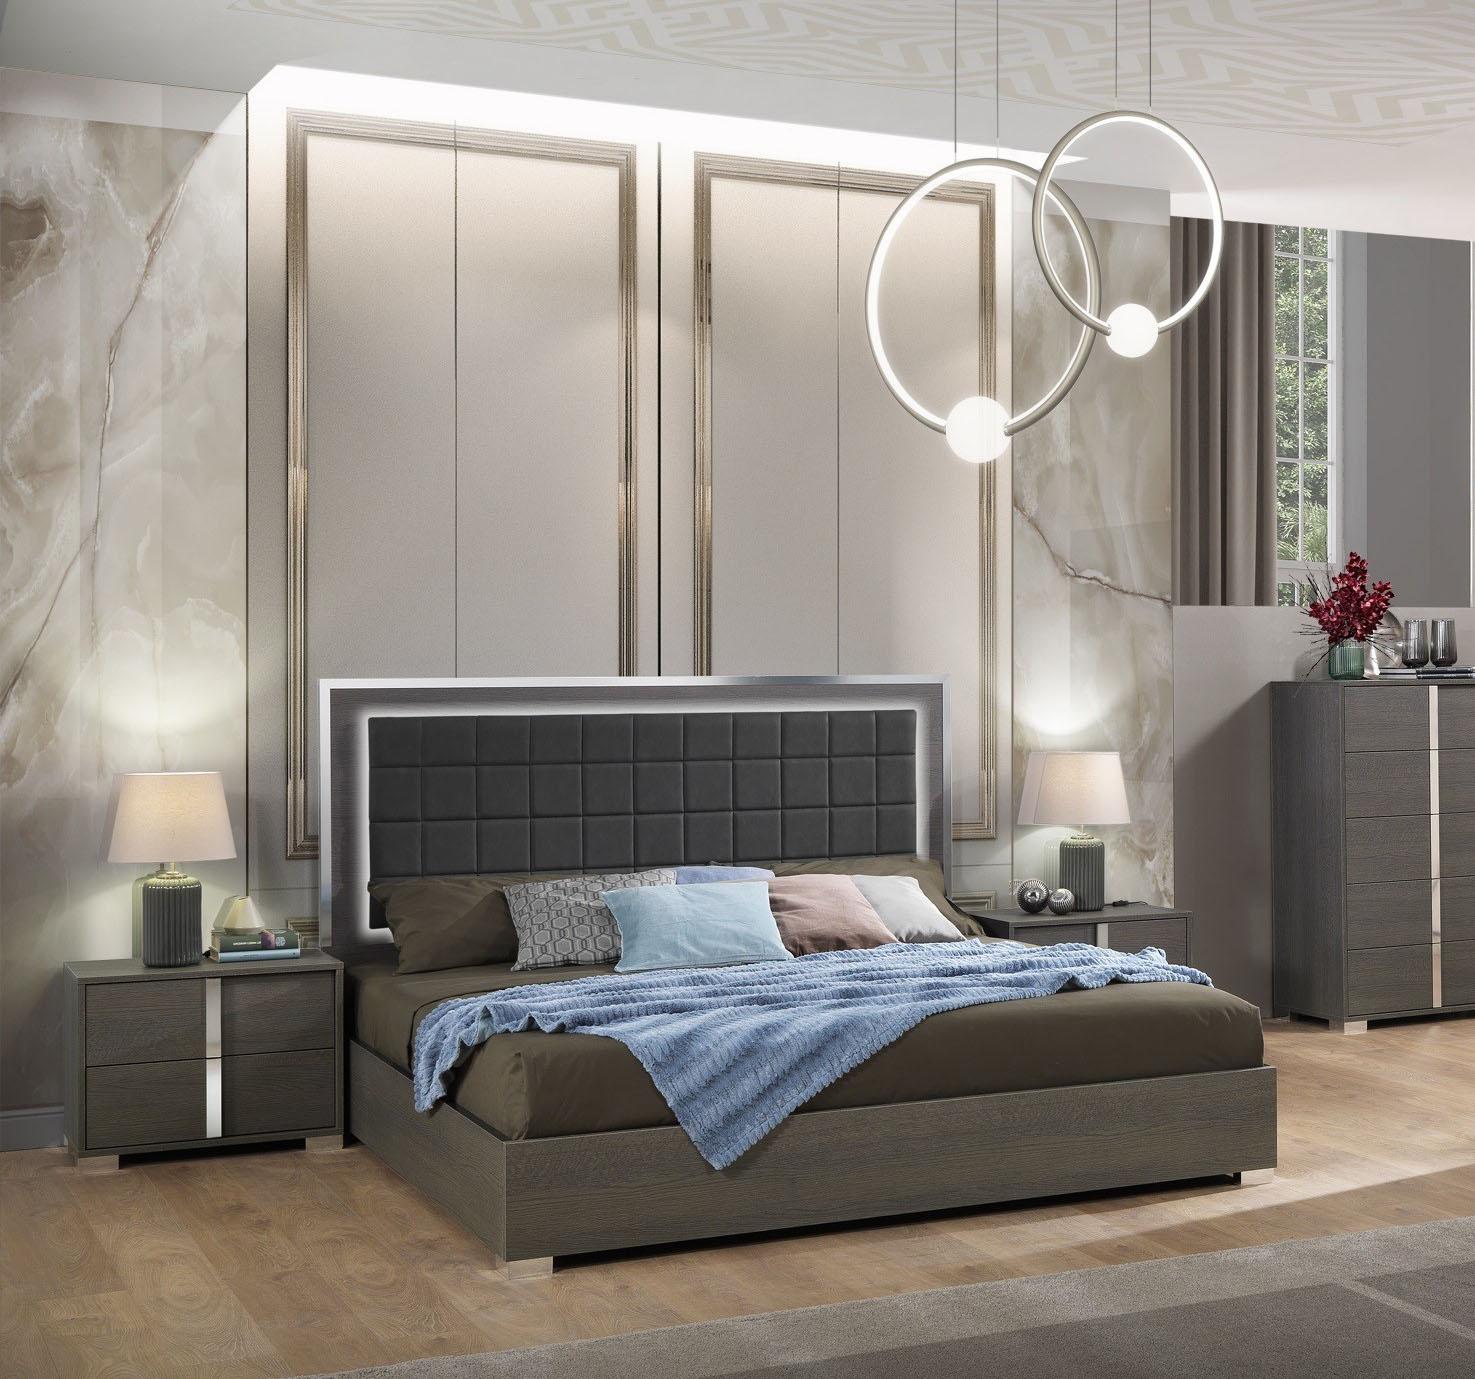 Contemporary Platform Bedroom Set Alice 15544-Q-3PC in Gray Leatherette